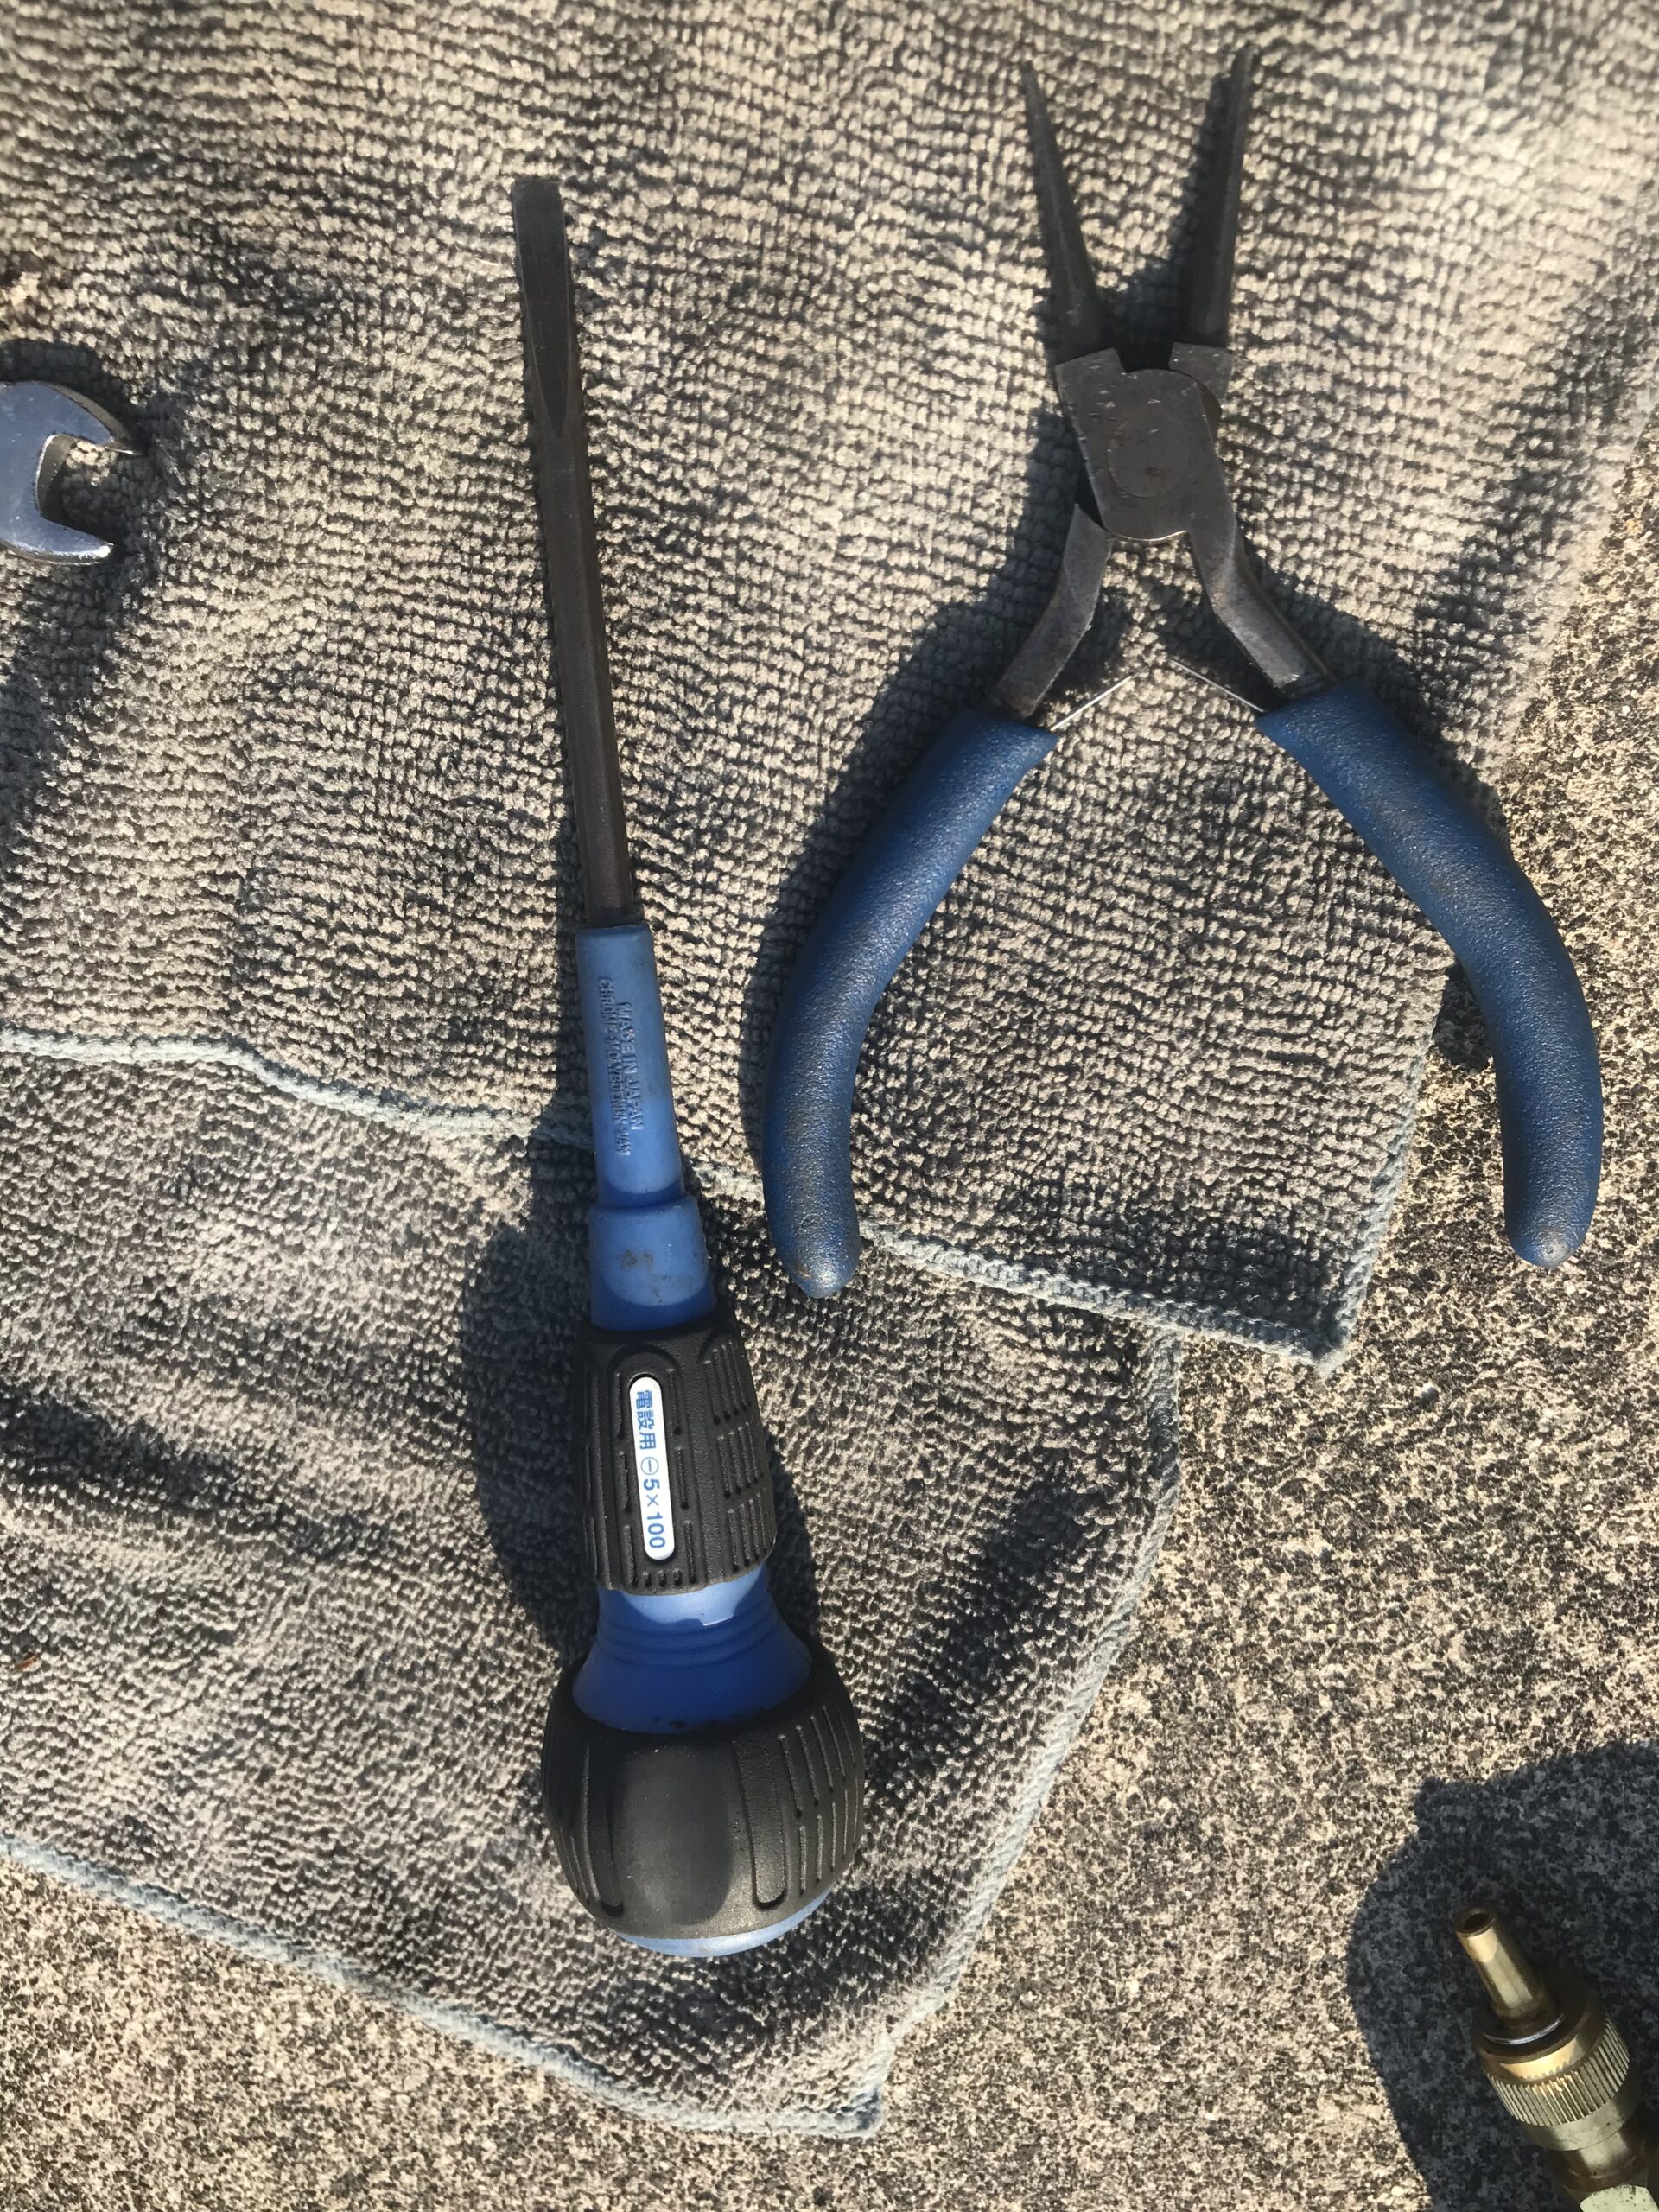 Radio pliers and PS screwdriver